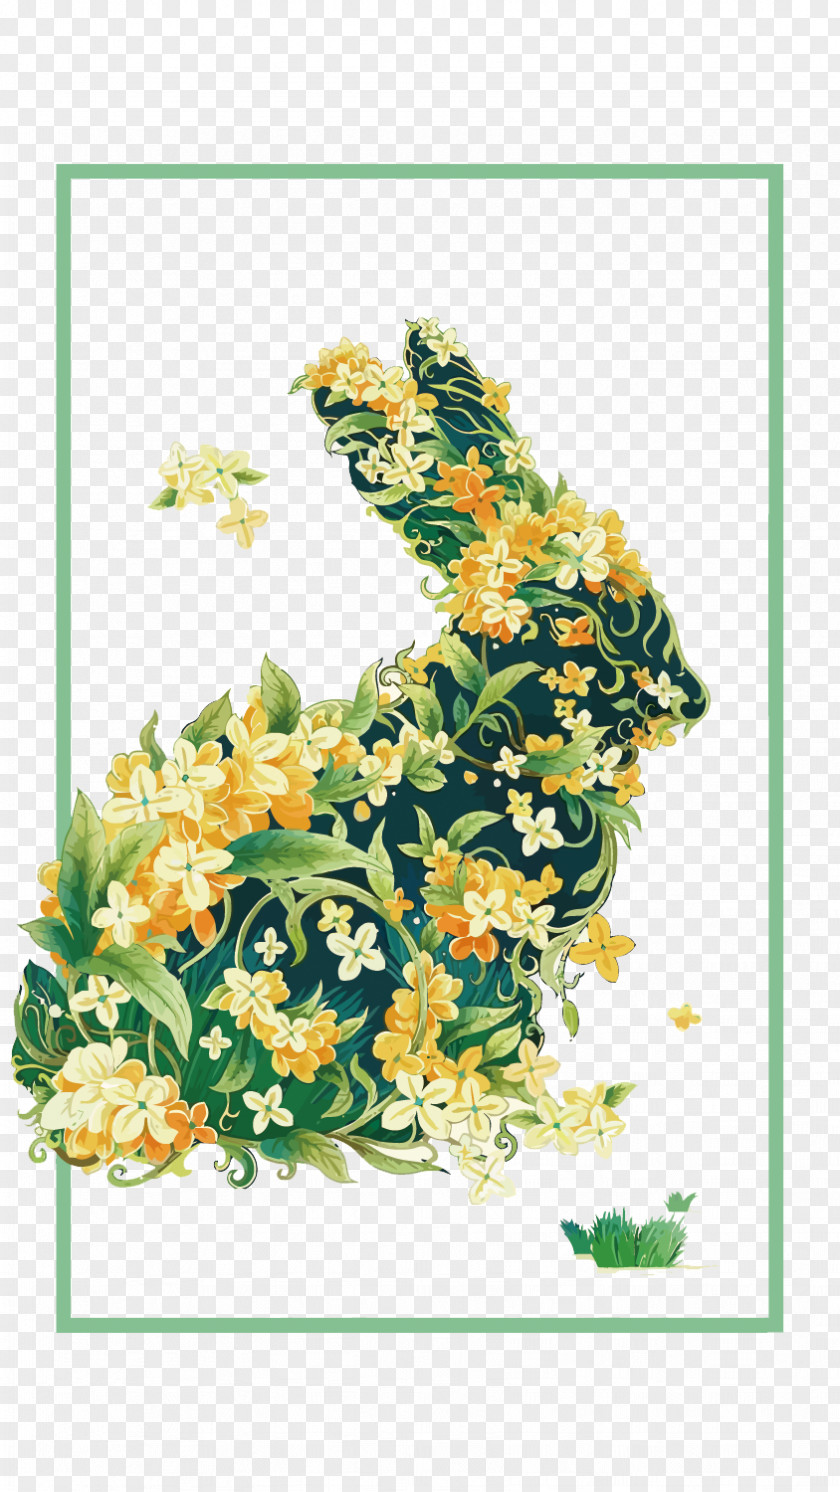 Vector Flowers And Bunny Flower Illustration PNG